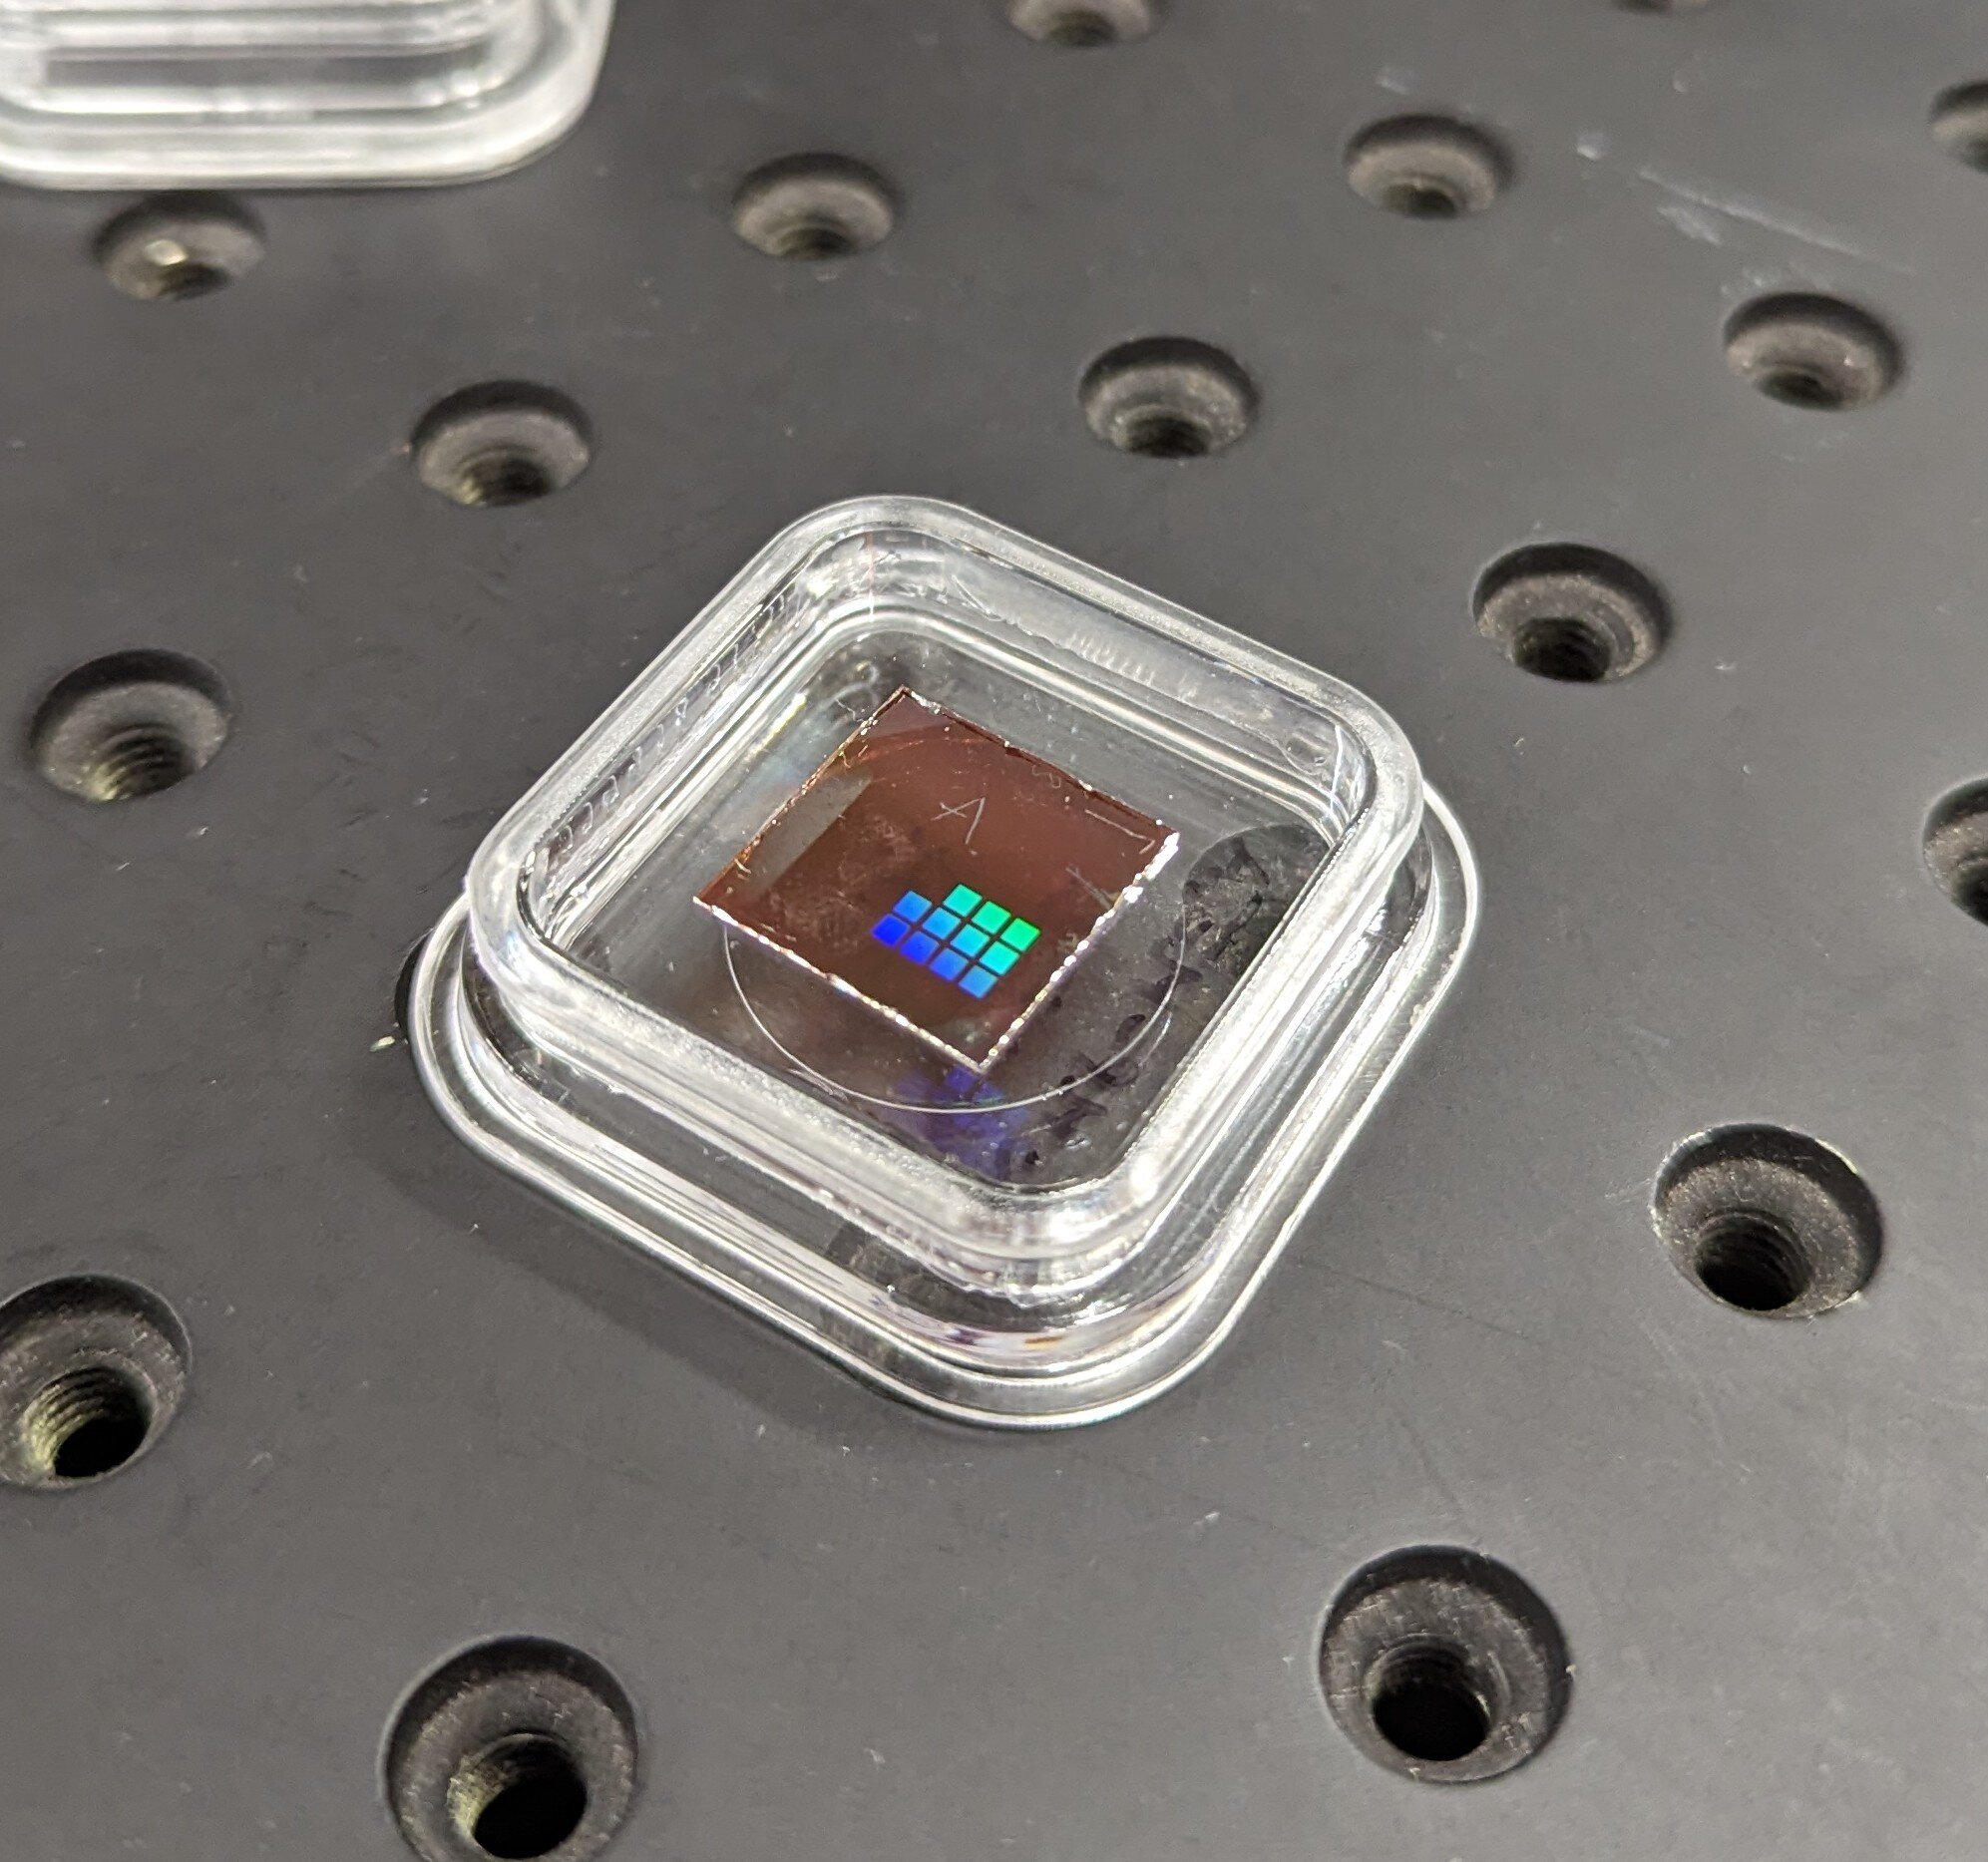 Tiny crop-health sensors could help cut the cost of groceries